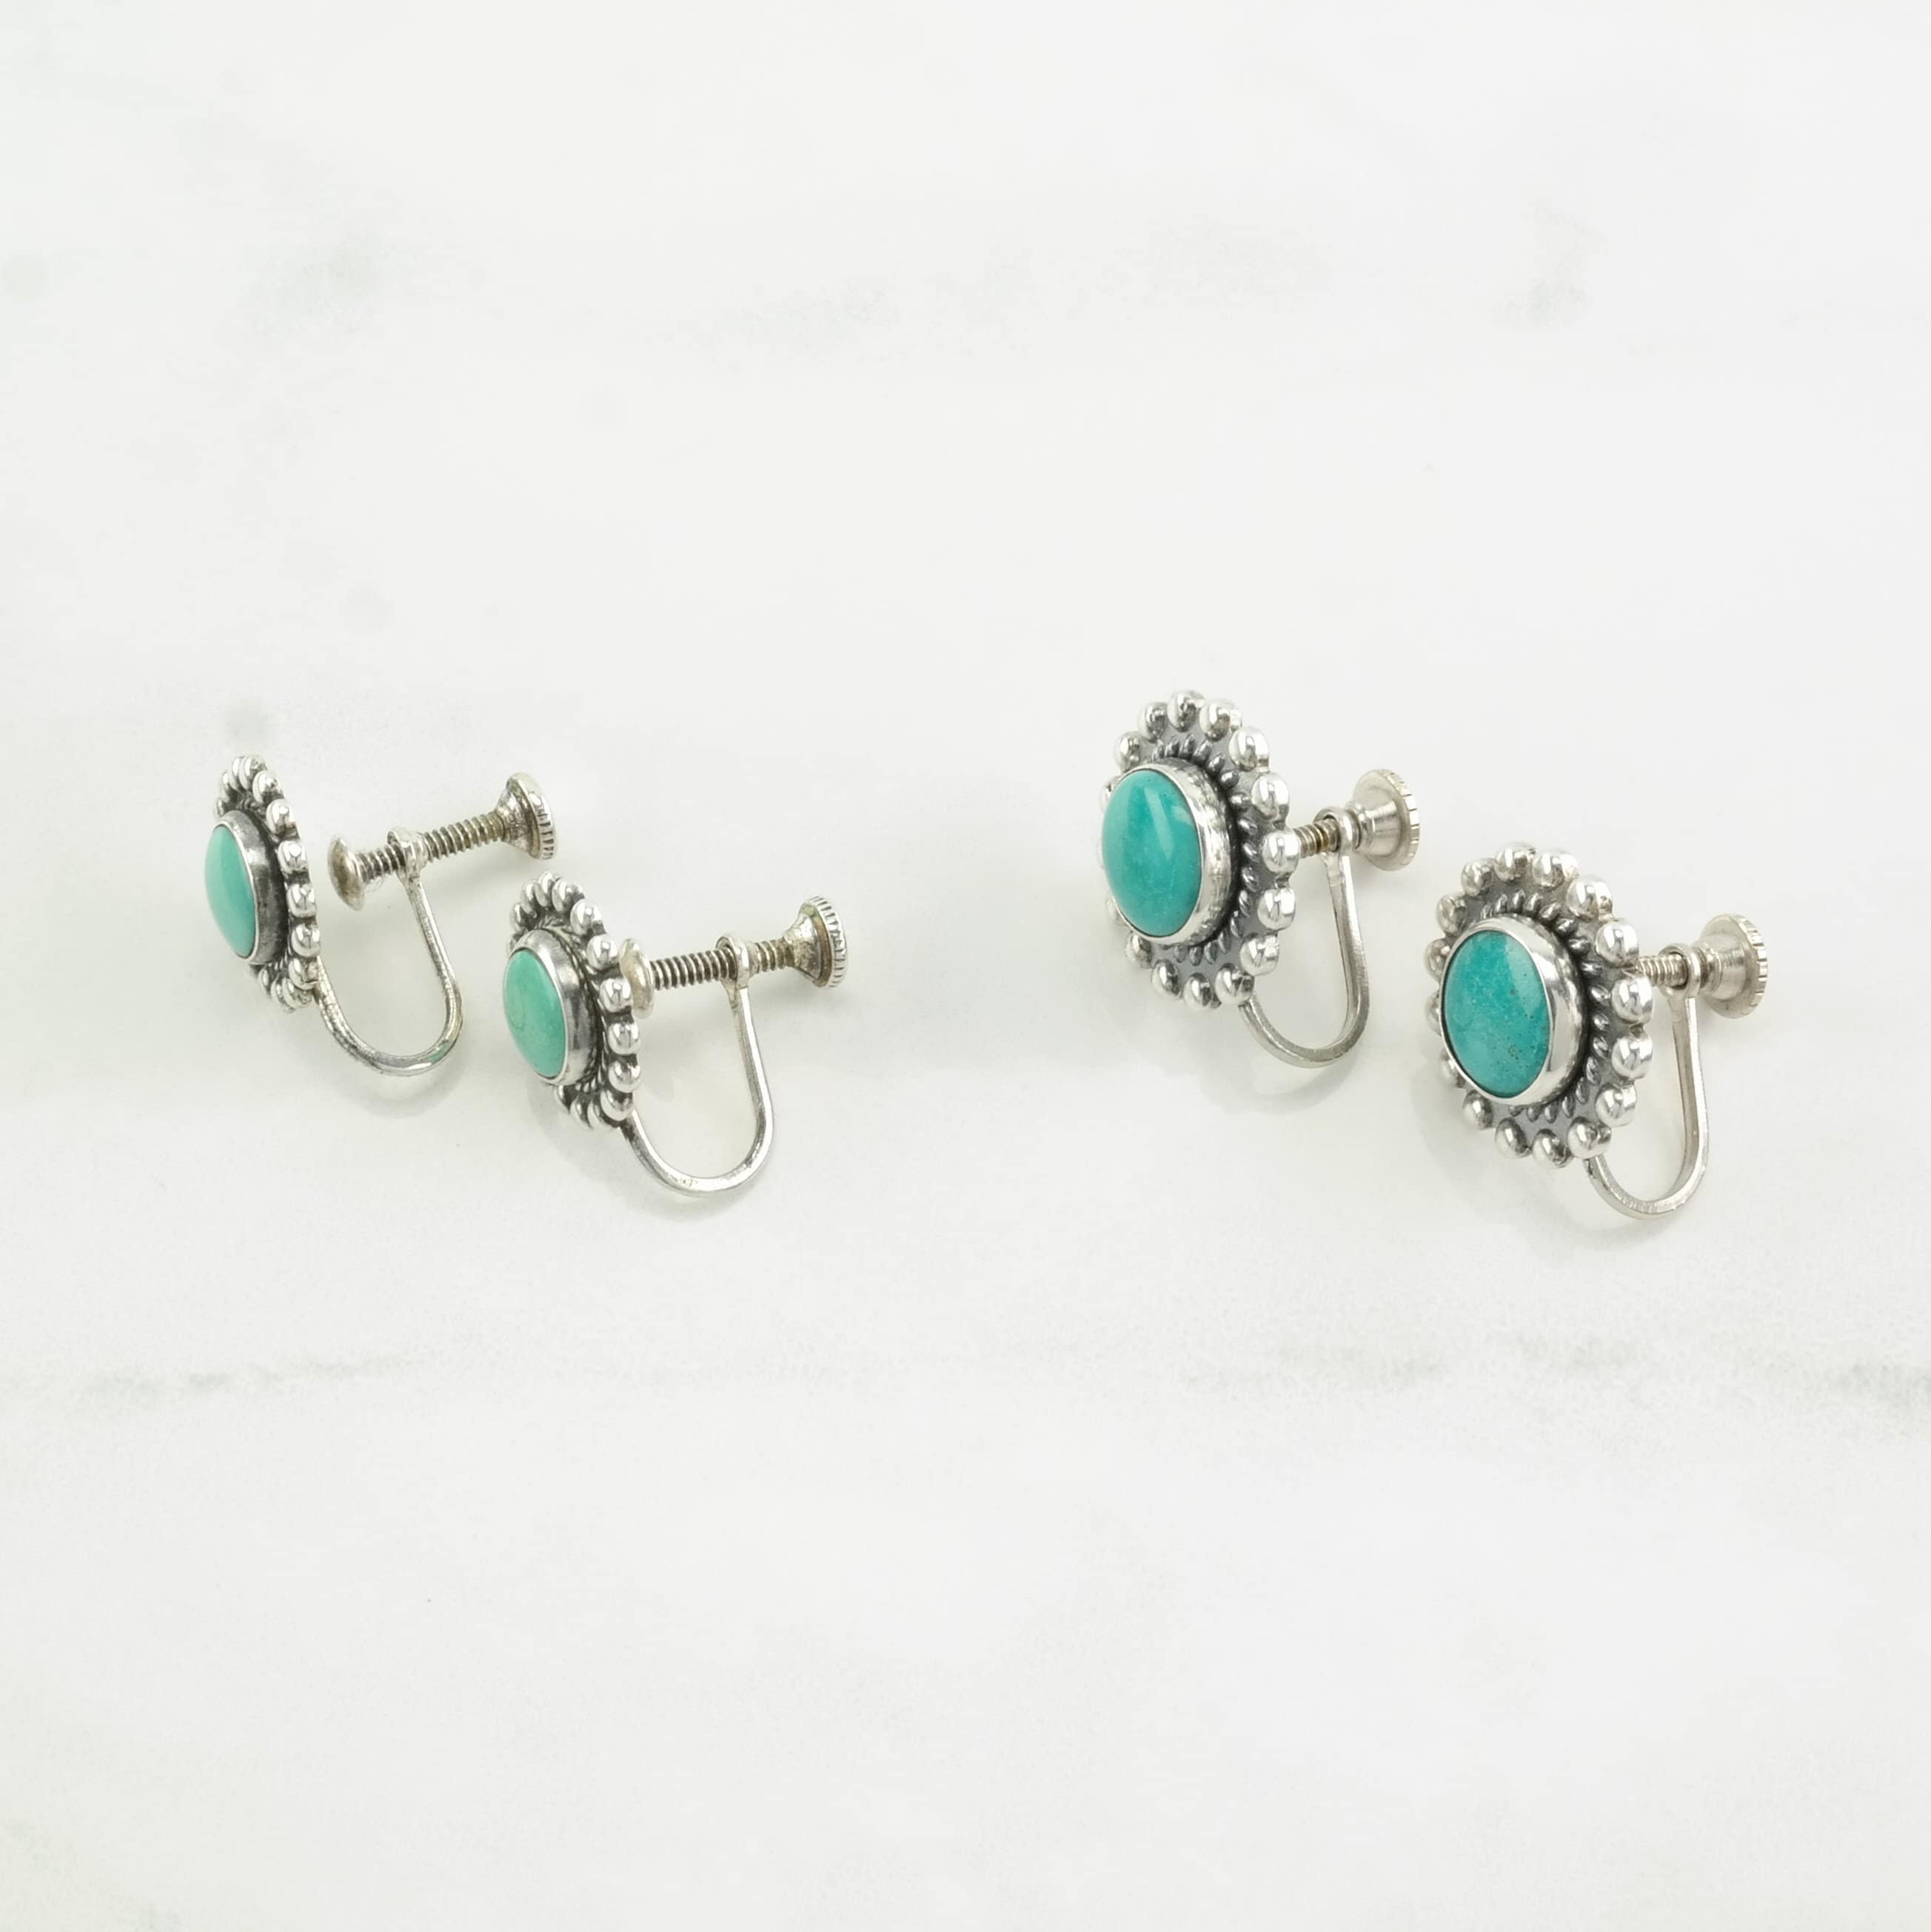 Choice of Native American Sterling Silver Turquoise Earrings Screw Back